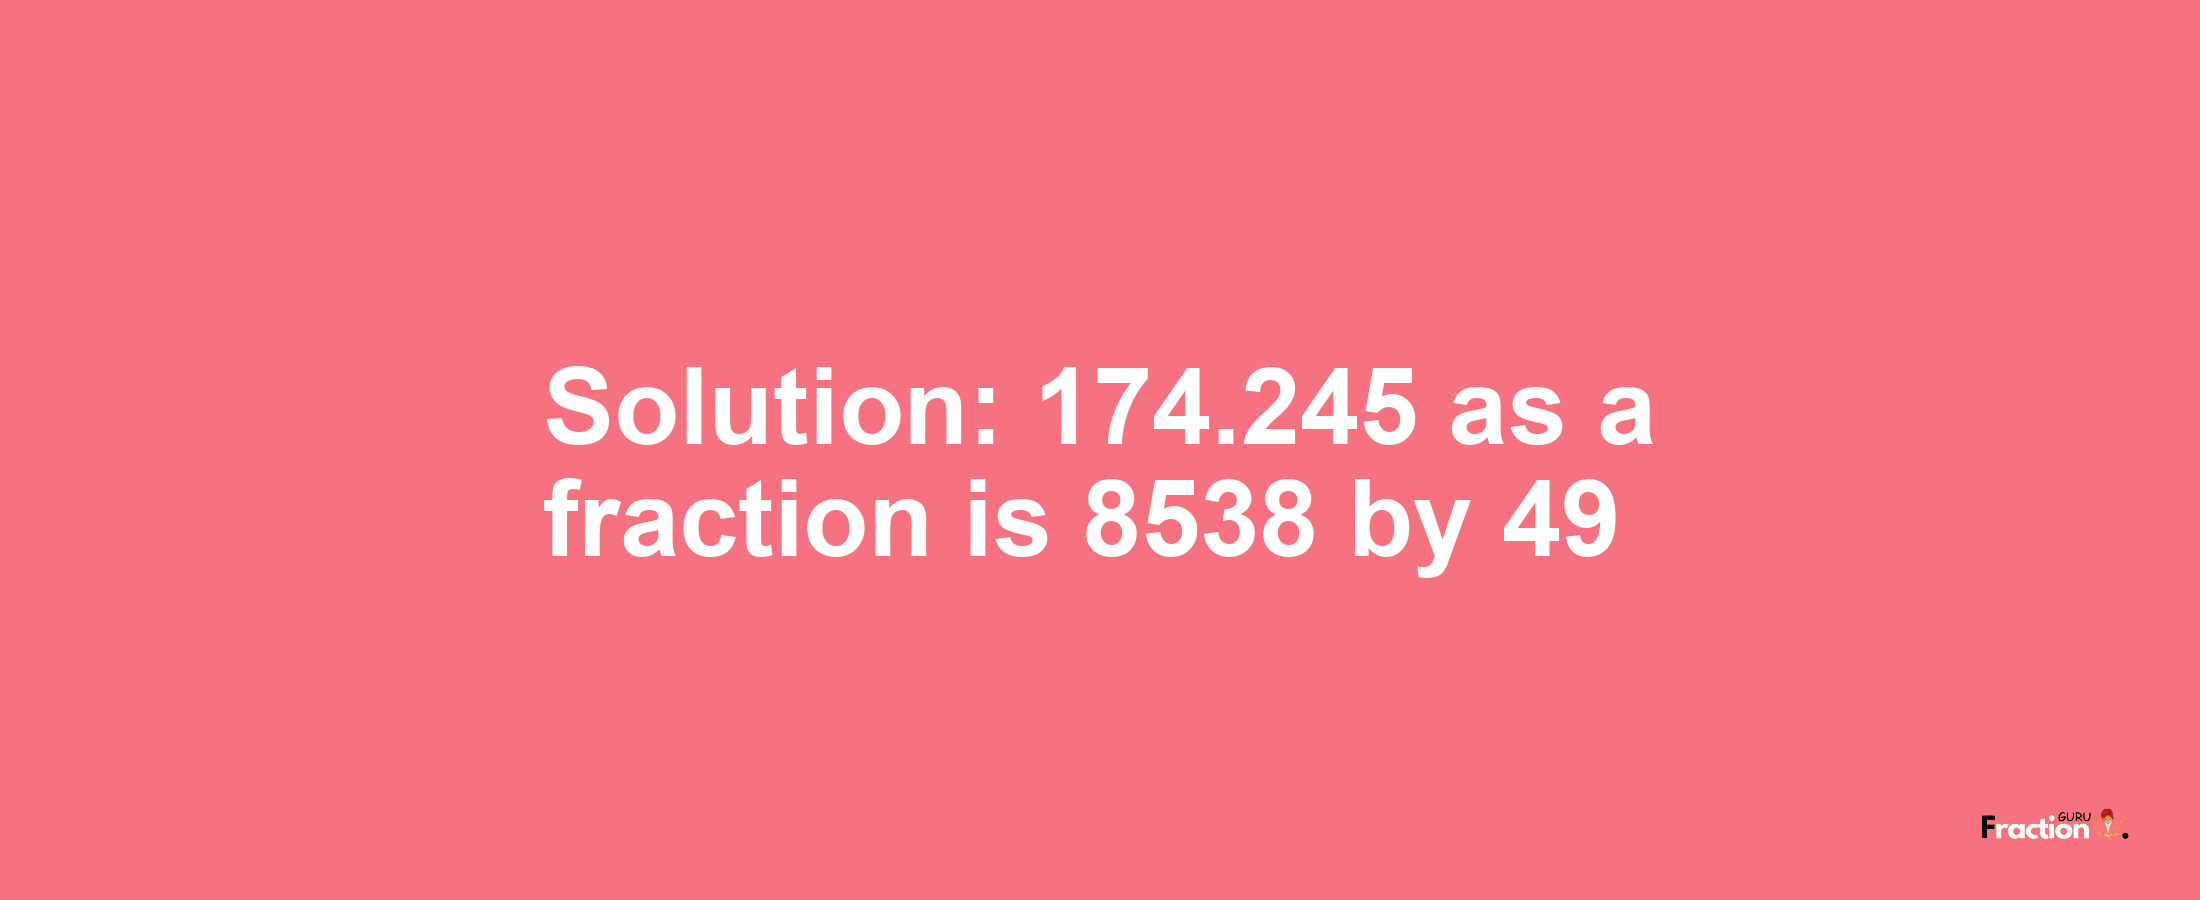 Solution:174.245 as a fraction is 8538/49